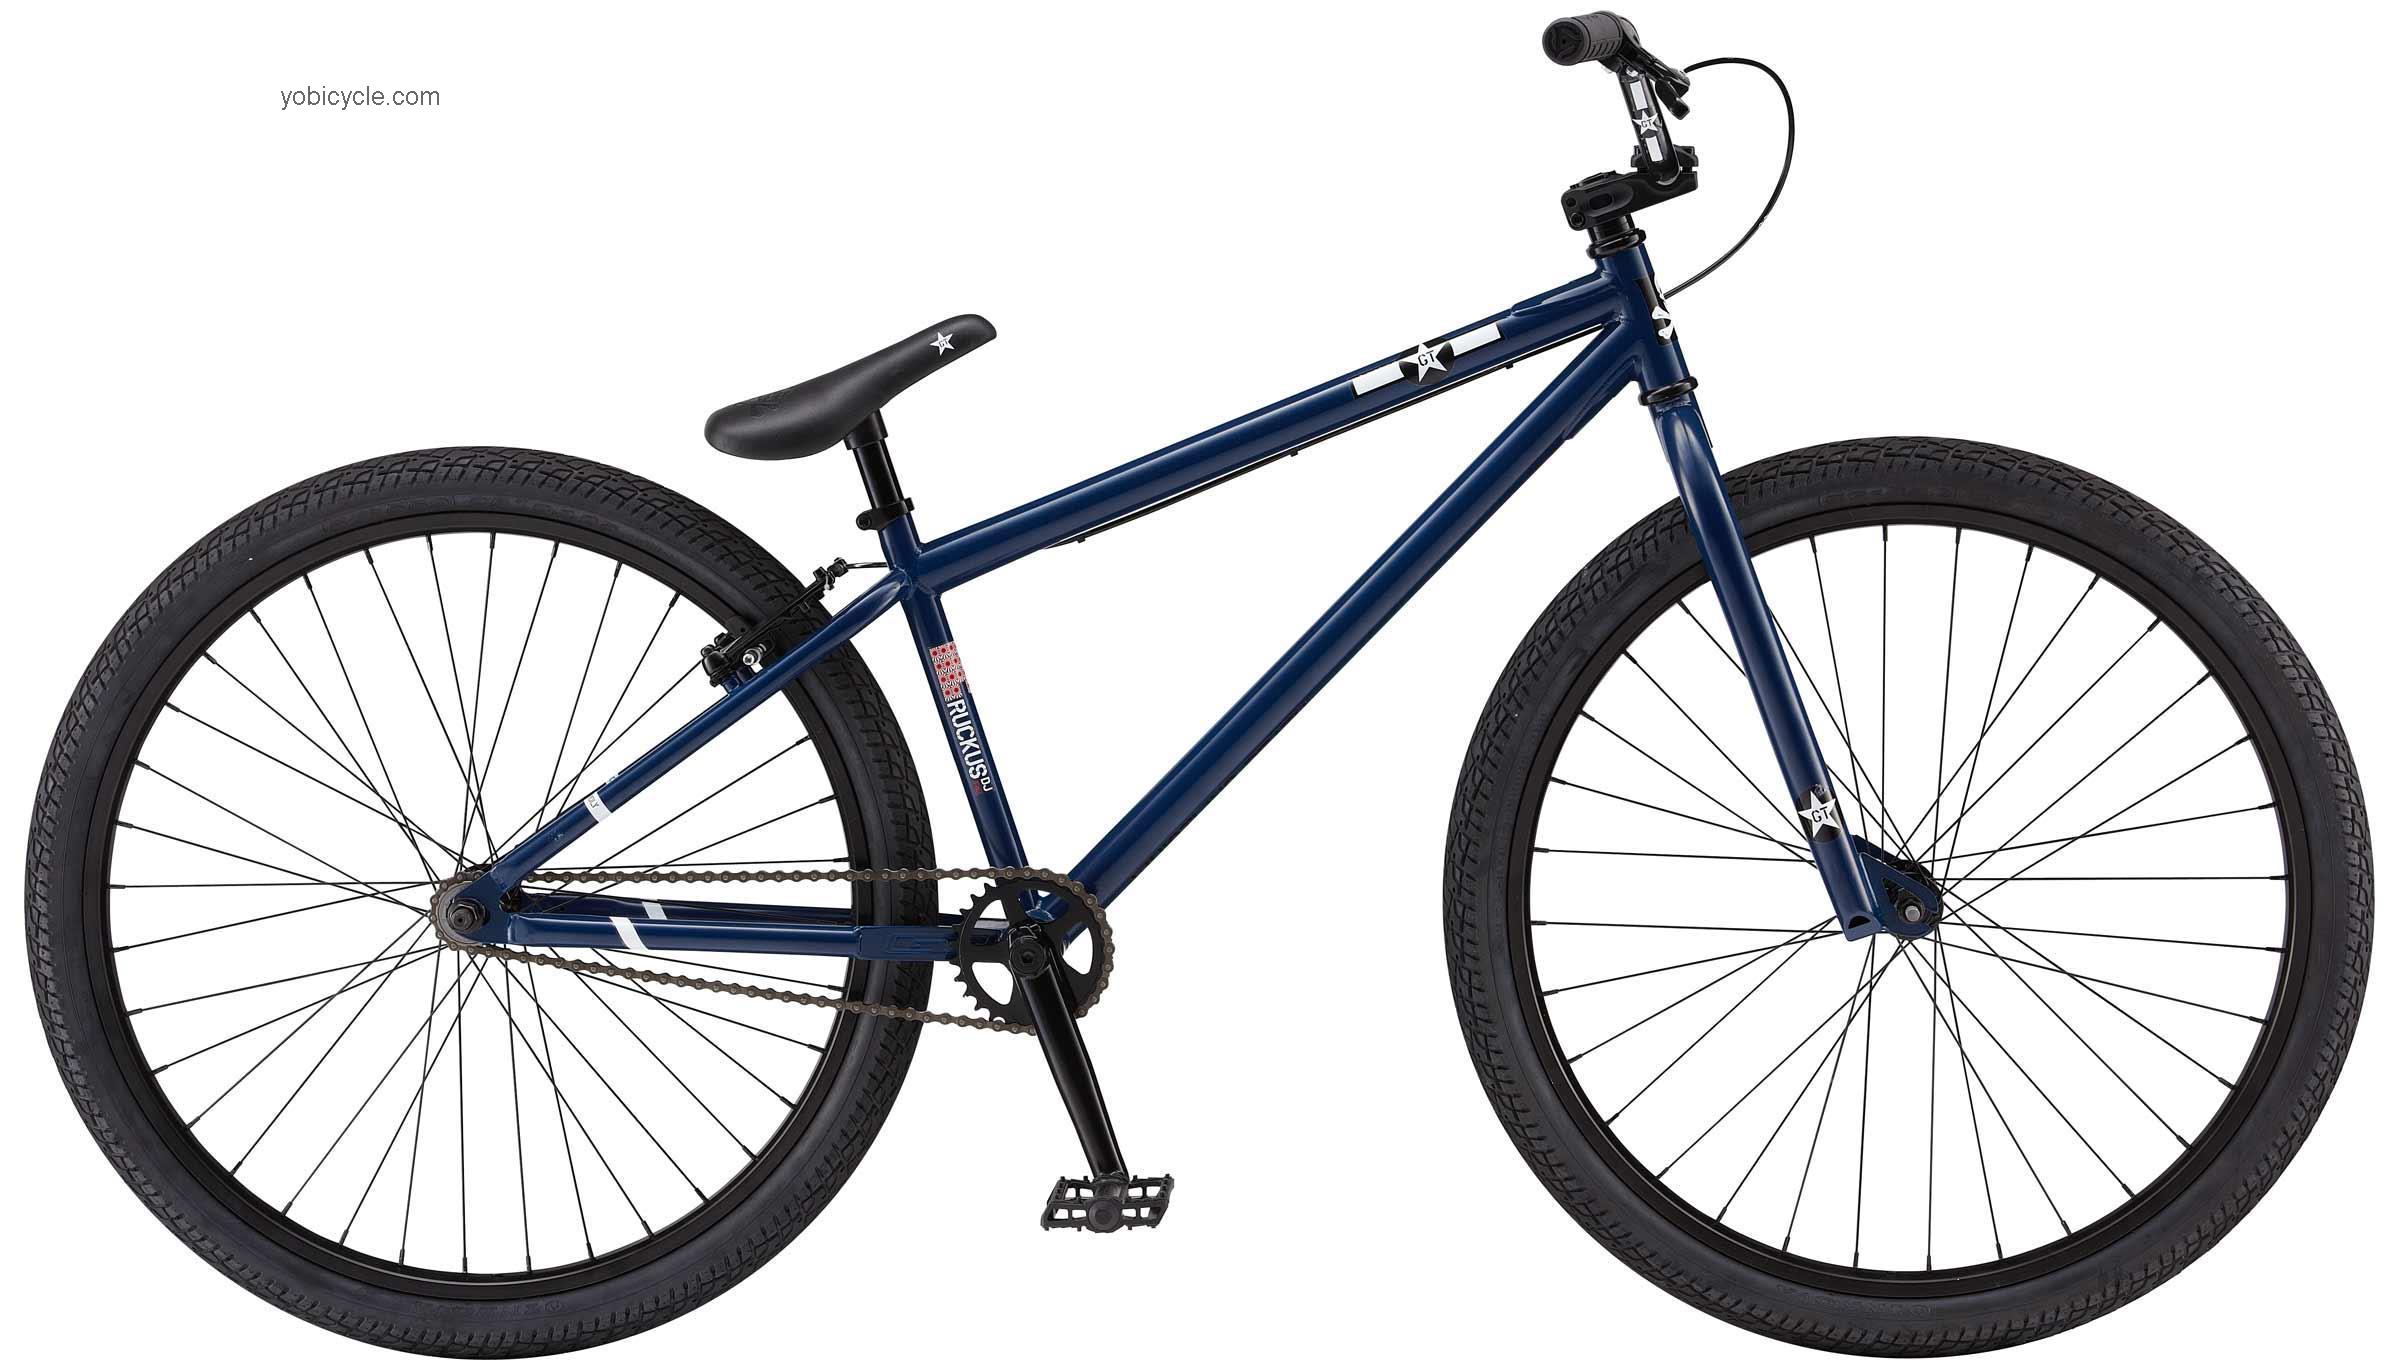 GT Bicycles Ruckus DJ 2013 comparison online with competitors